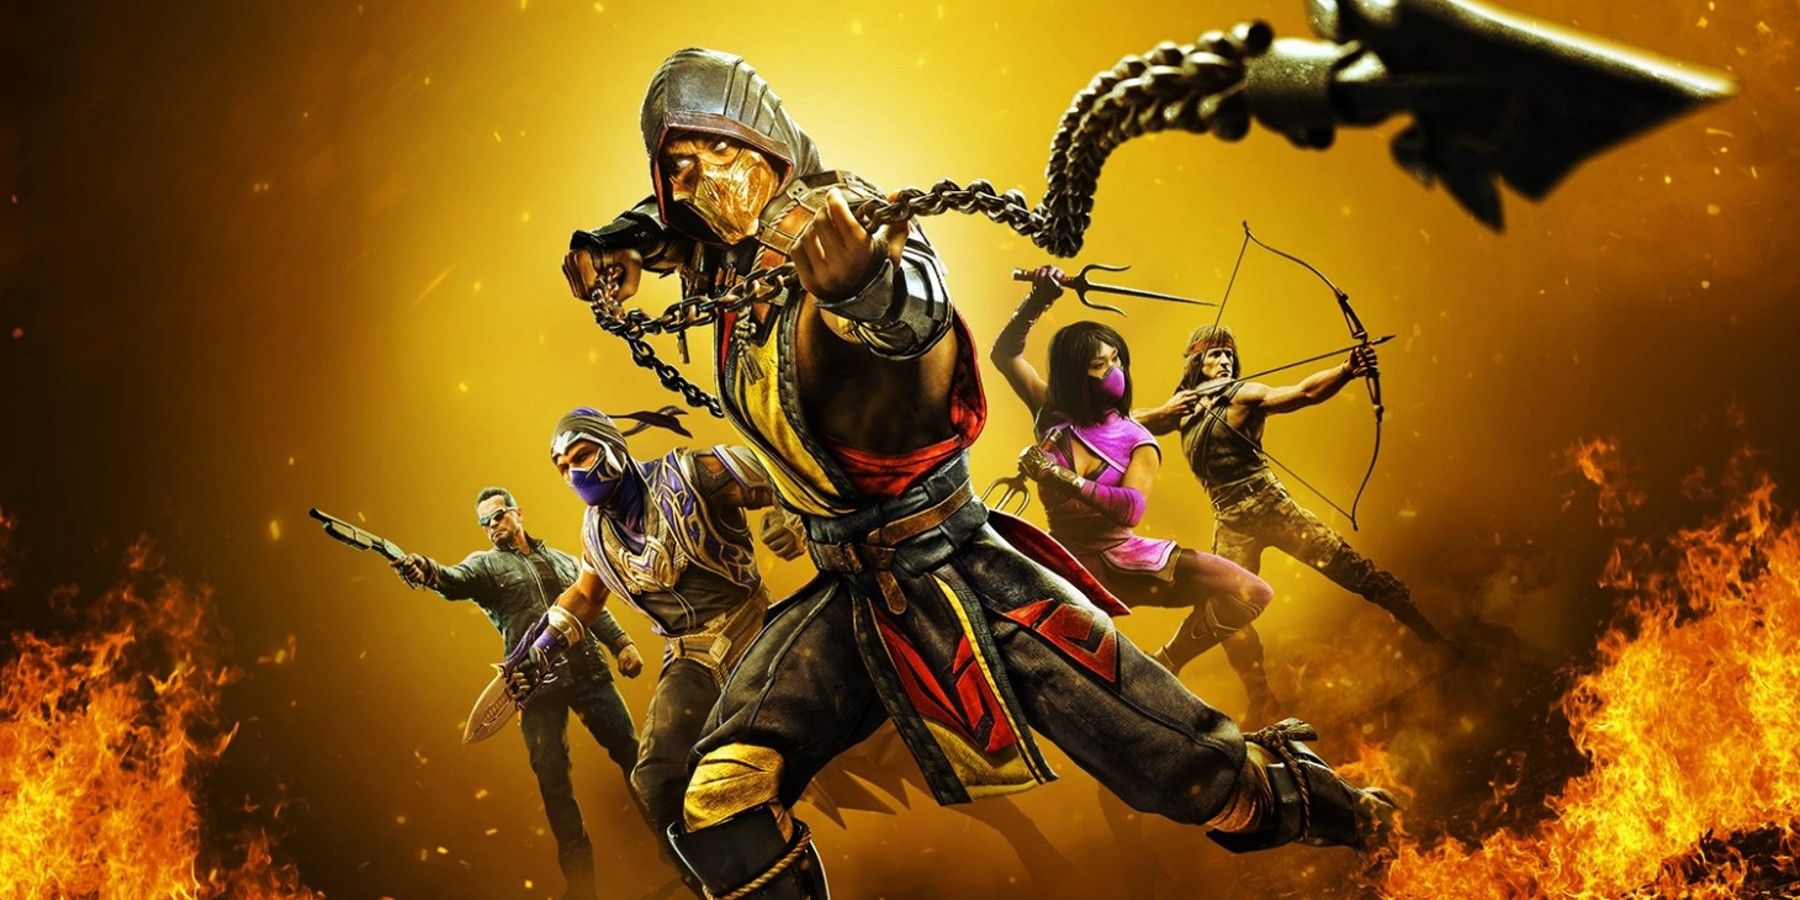 If MK12 will be the Trilogy from NRS games (MK9, MKX and MK11), this could  be a potential roster. No guest from past games, left characters as DLC  (Takeda, Kung Jin, Goro